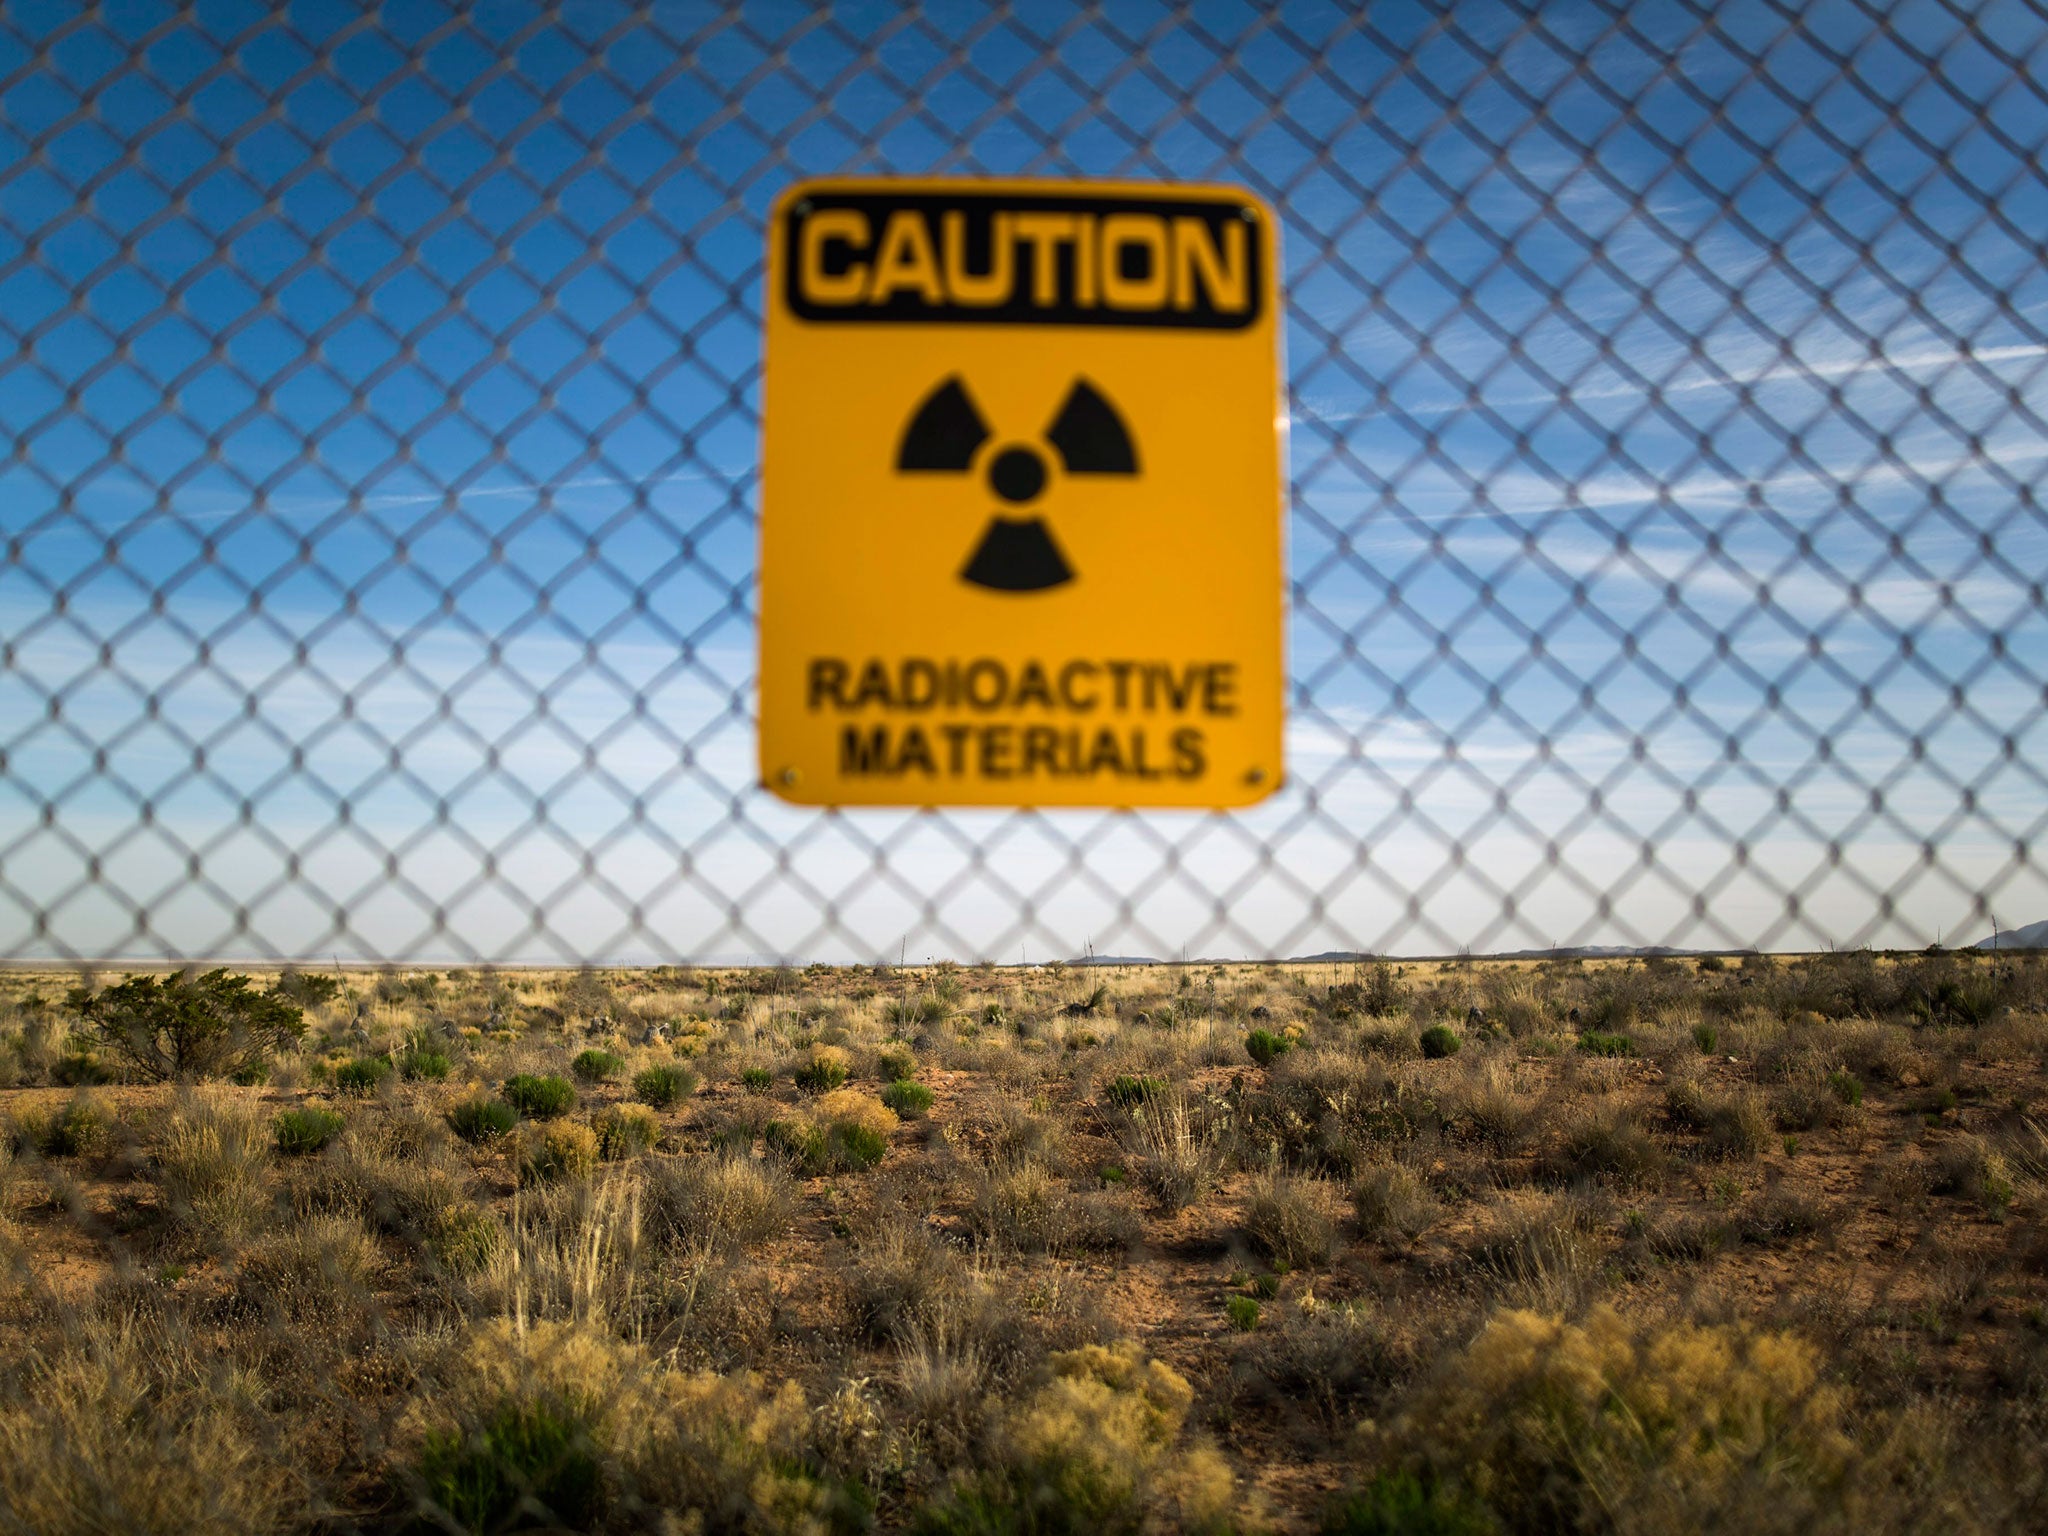 A warning sign is seen on a fence surrounding the Trinity Test Site, where on July 16, 1945 scientists working with the Manhattan Project detonated the world's first atomic bomb, on White Sands Missile Range just outside San Antonio, New Mexico